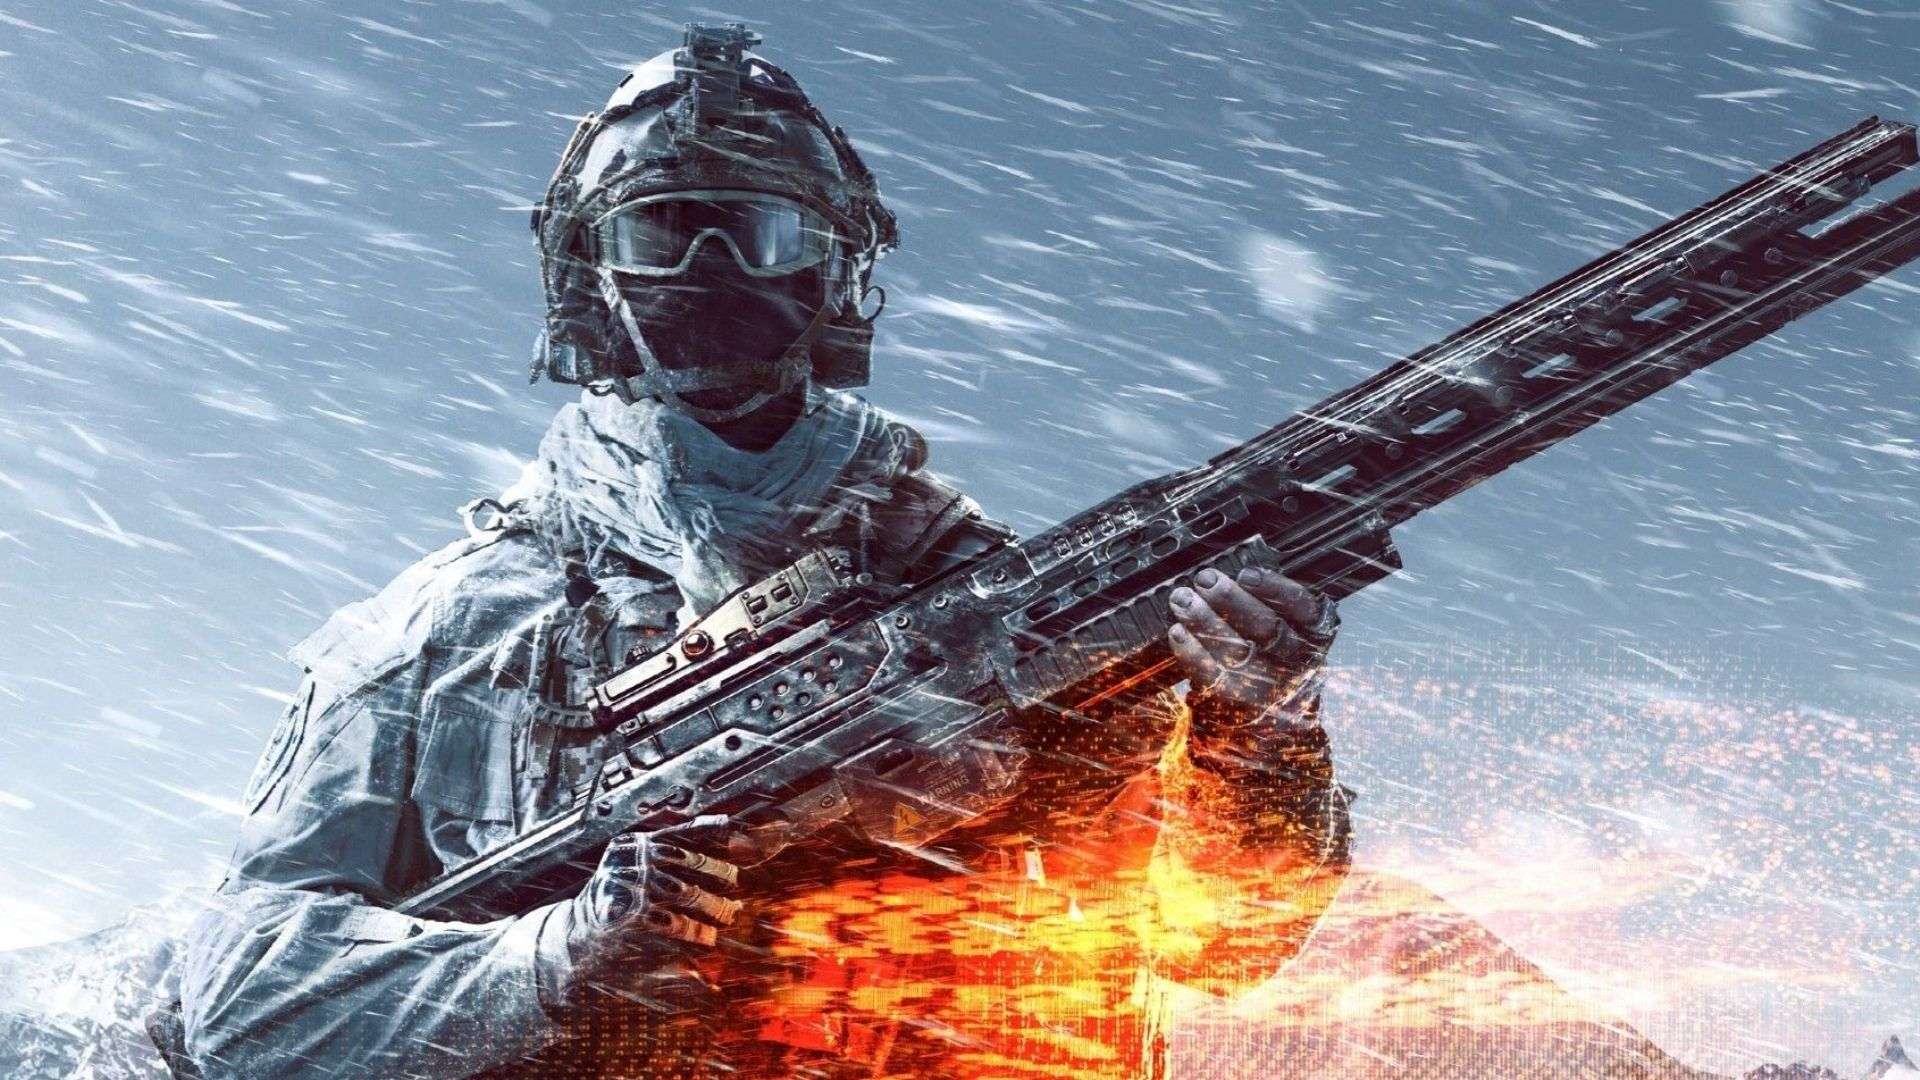 Battlefield 4 character holding a weapon